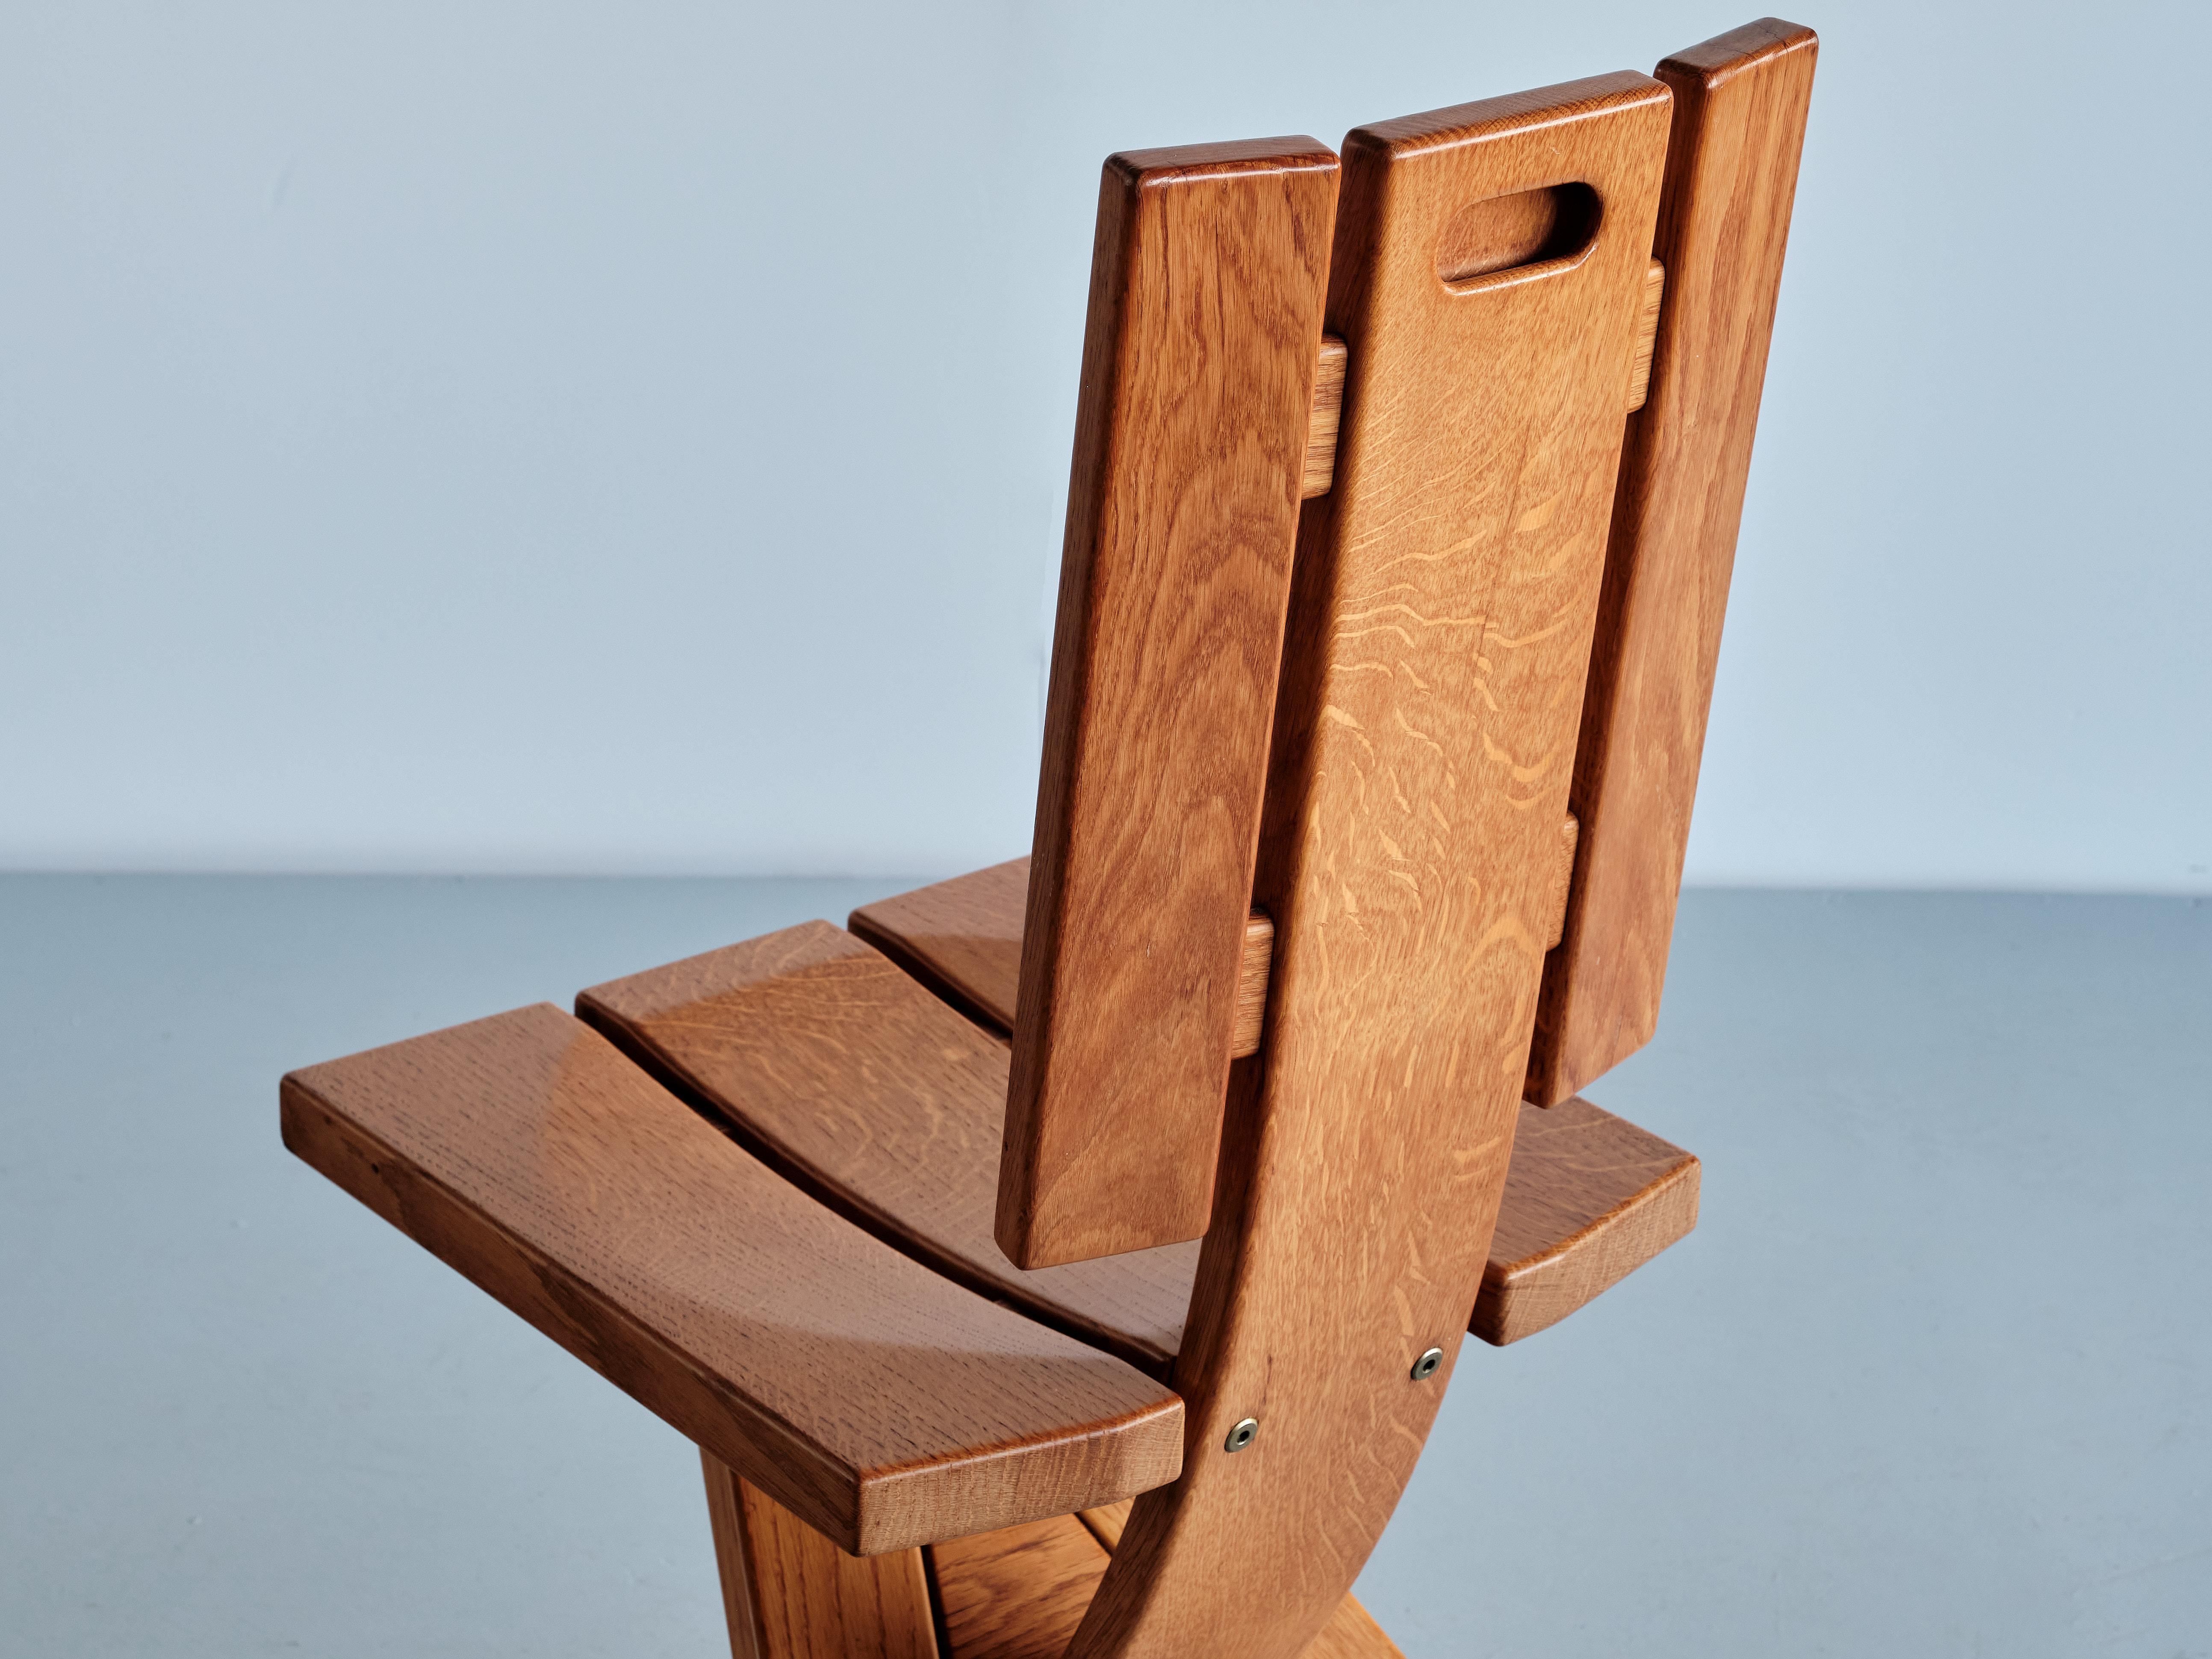 Sculptural Set of Four Ebénisterie Seltz Dining Chairs in Oak, France, 1970s For Sale 2